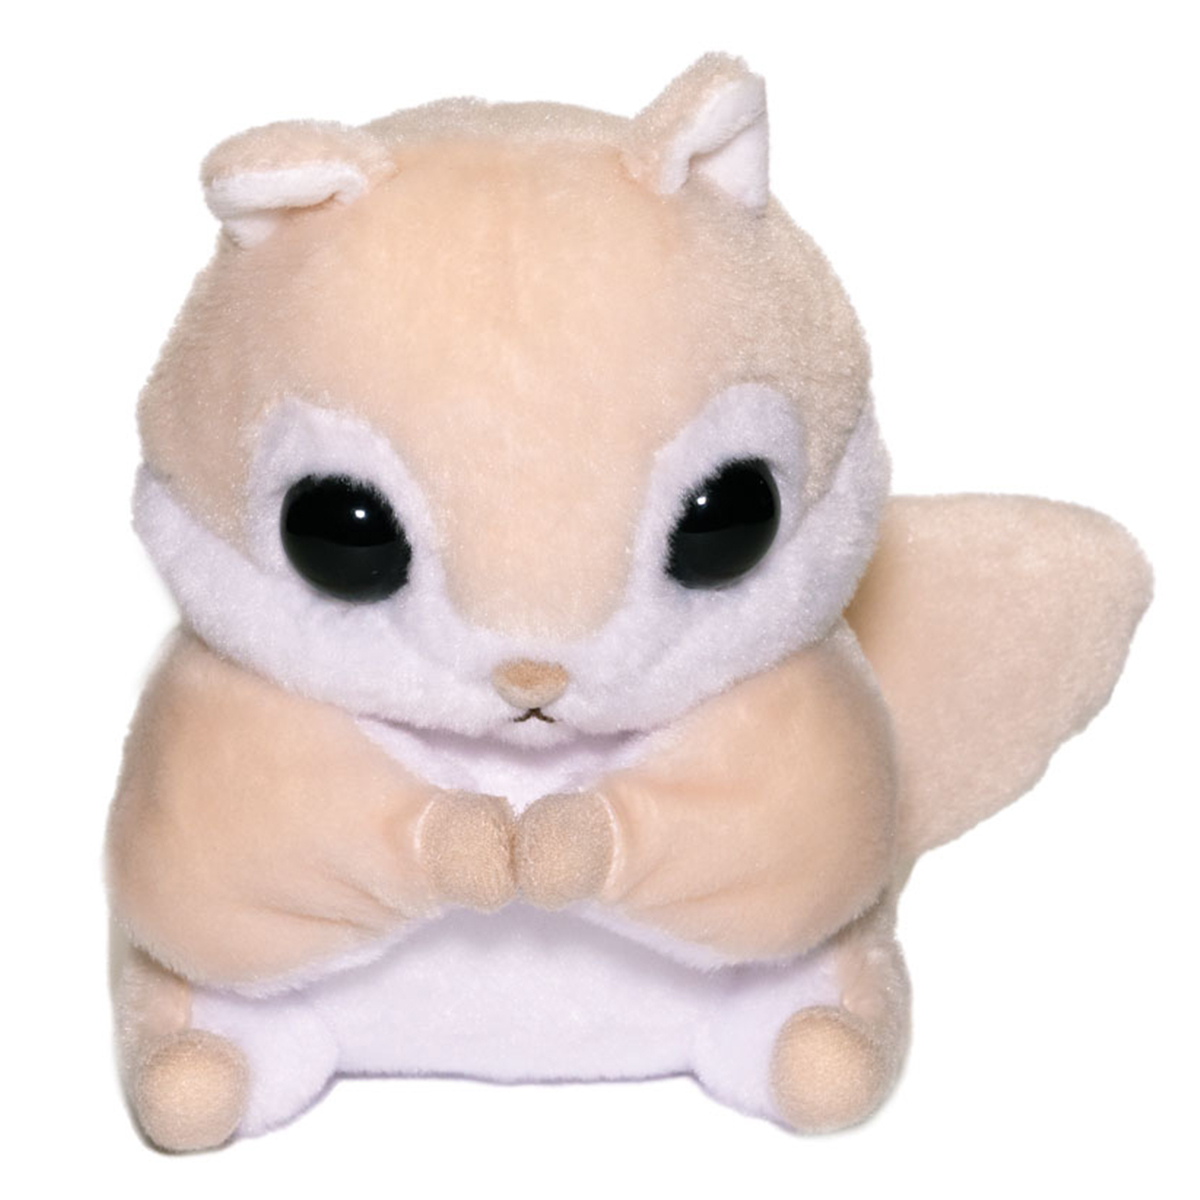 Flying Squirrel Plush Doll, Beige, Standard Size, 5 Inches